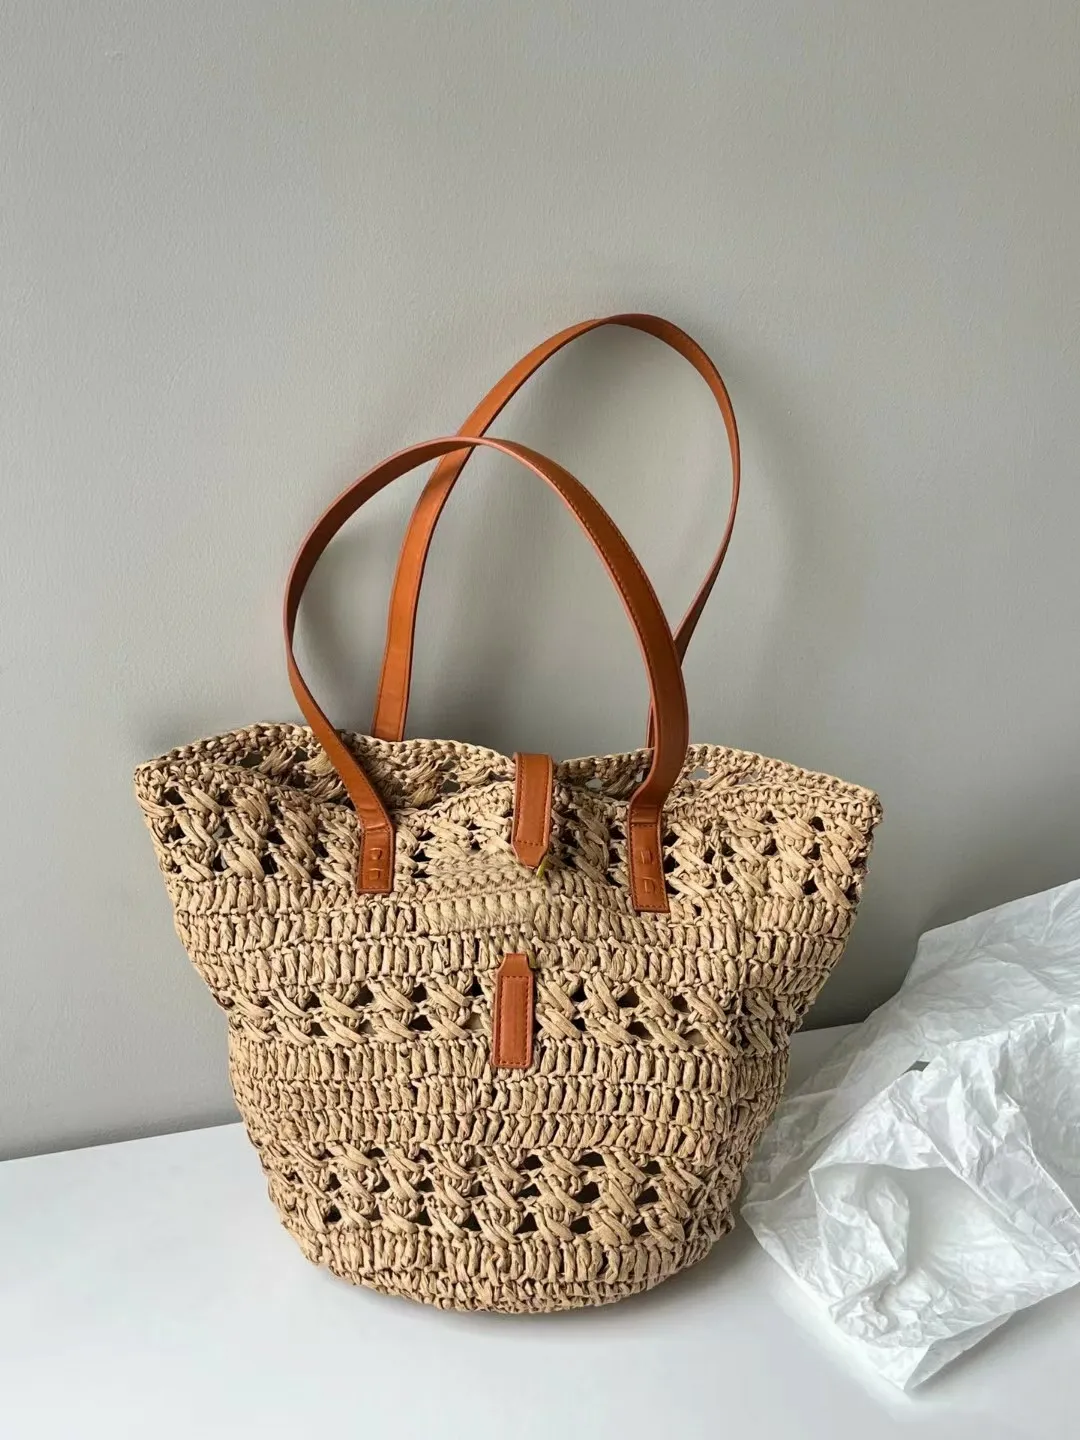 Buy Straw Handbags Women Handwoven Round Corn Straw Bags Natural Chic Hand  Large Summer Beach Tote Woven Handle Shoulder Bag (Beige) at Amazon.in